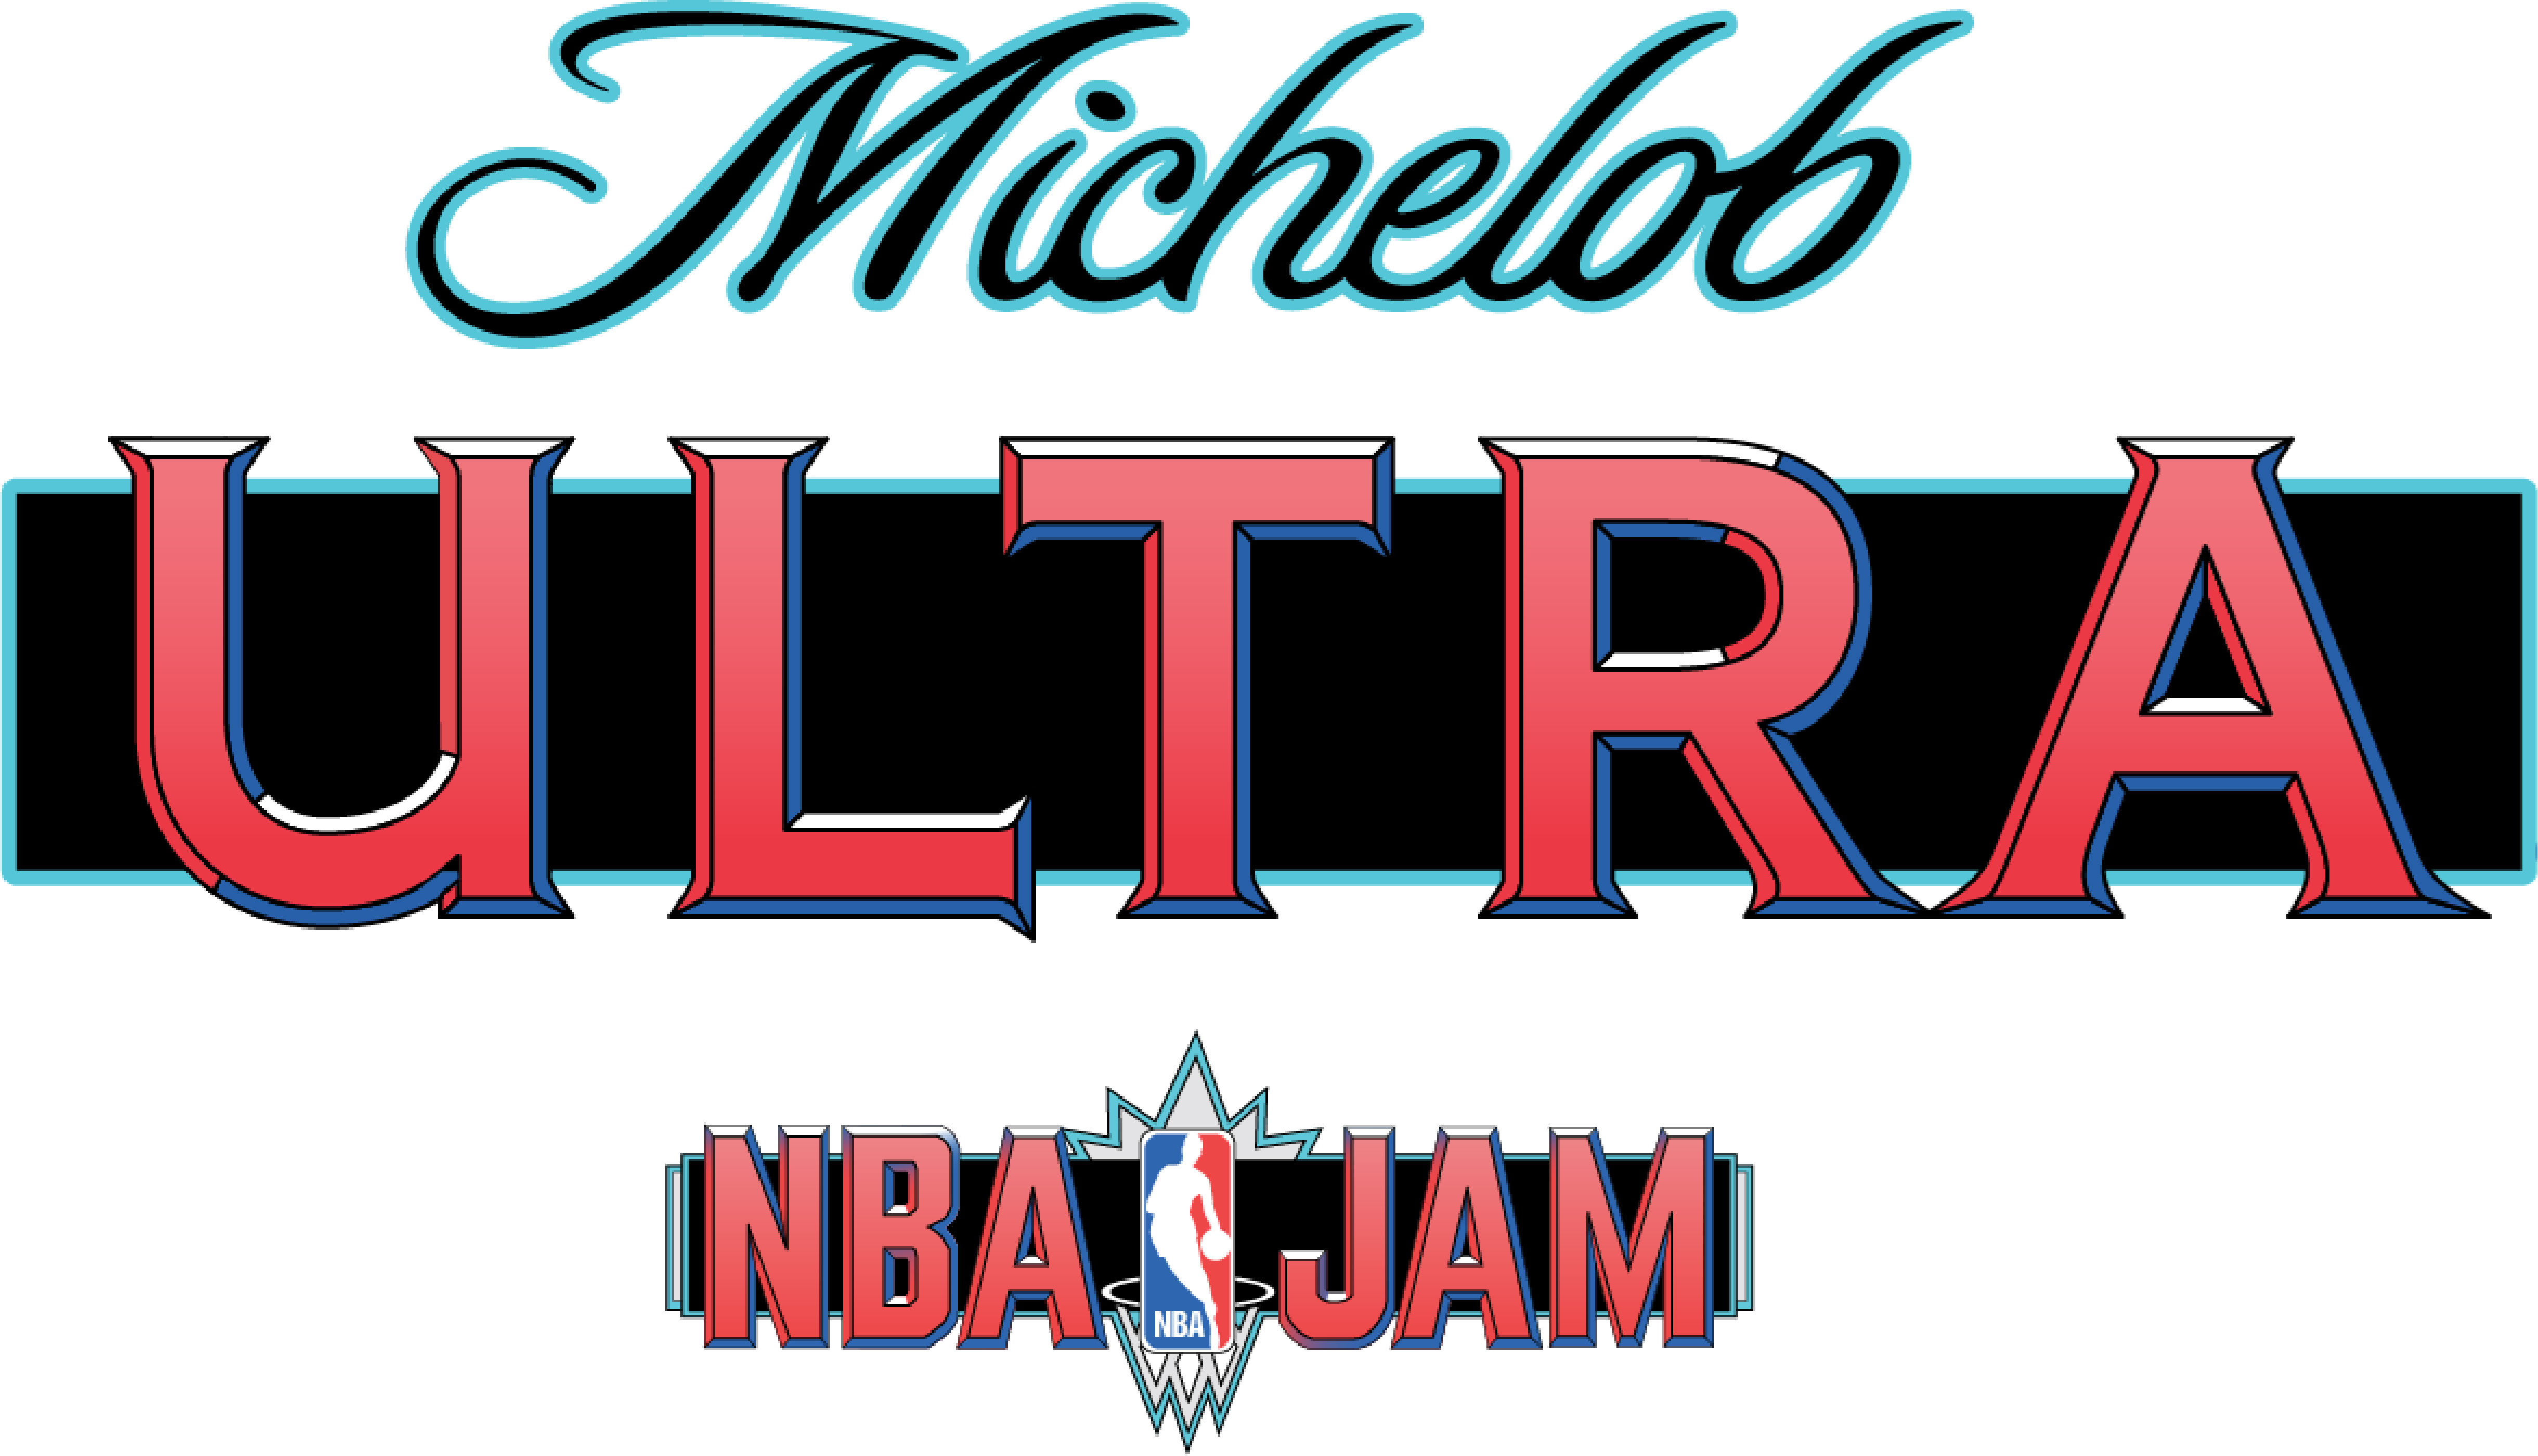 Michelob ULTRA Teams Up with NBA JAM to Bring ‘90s Nostalgia to Basketball Fans Everywhere for NBA All-Star 2022